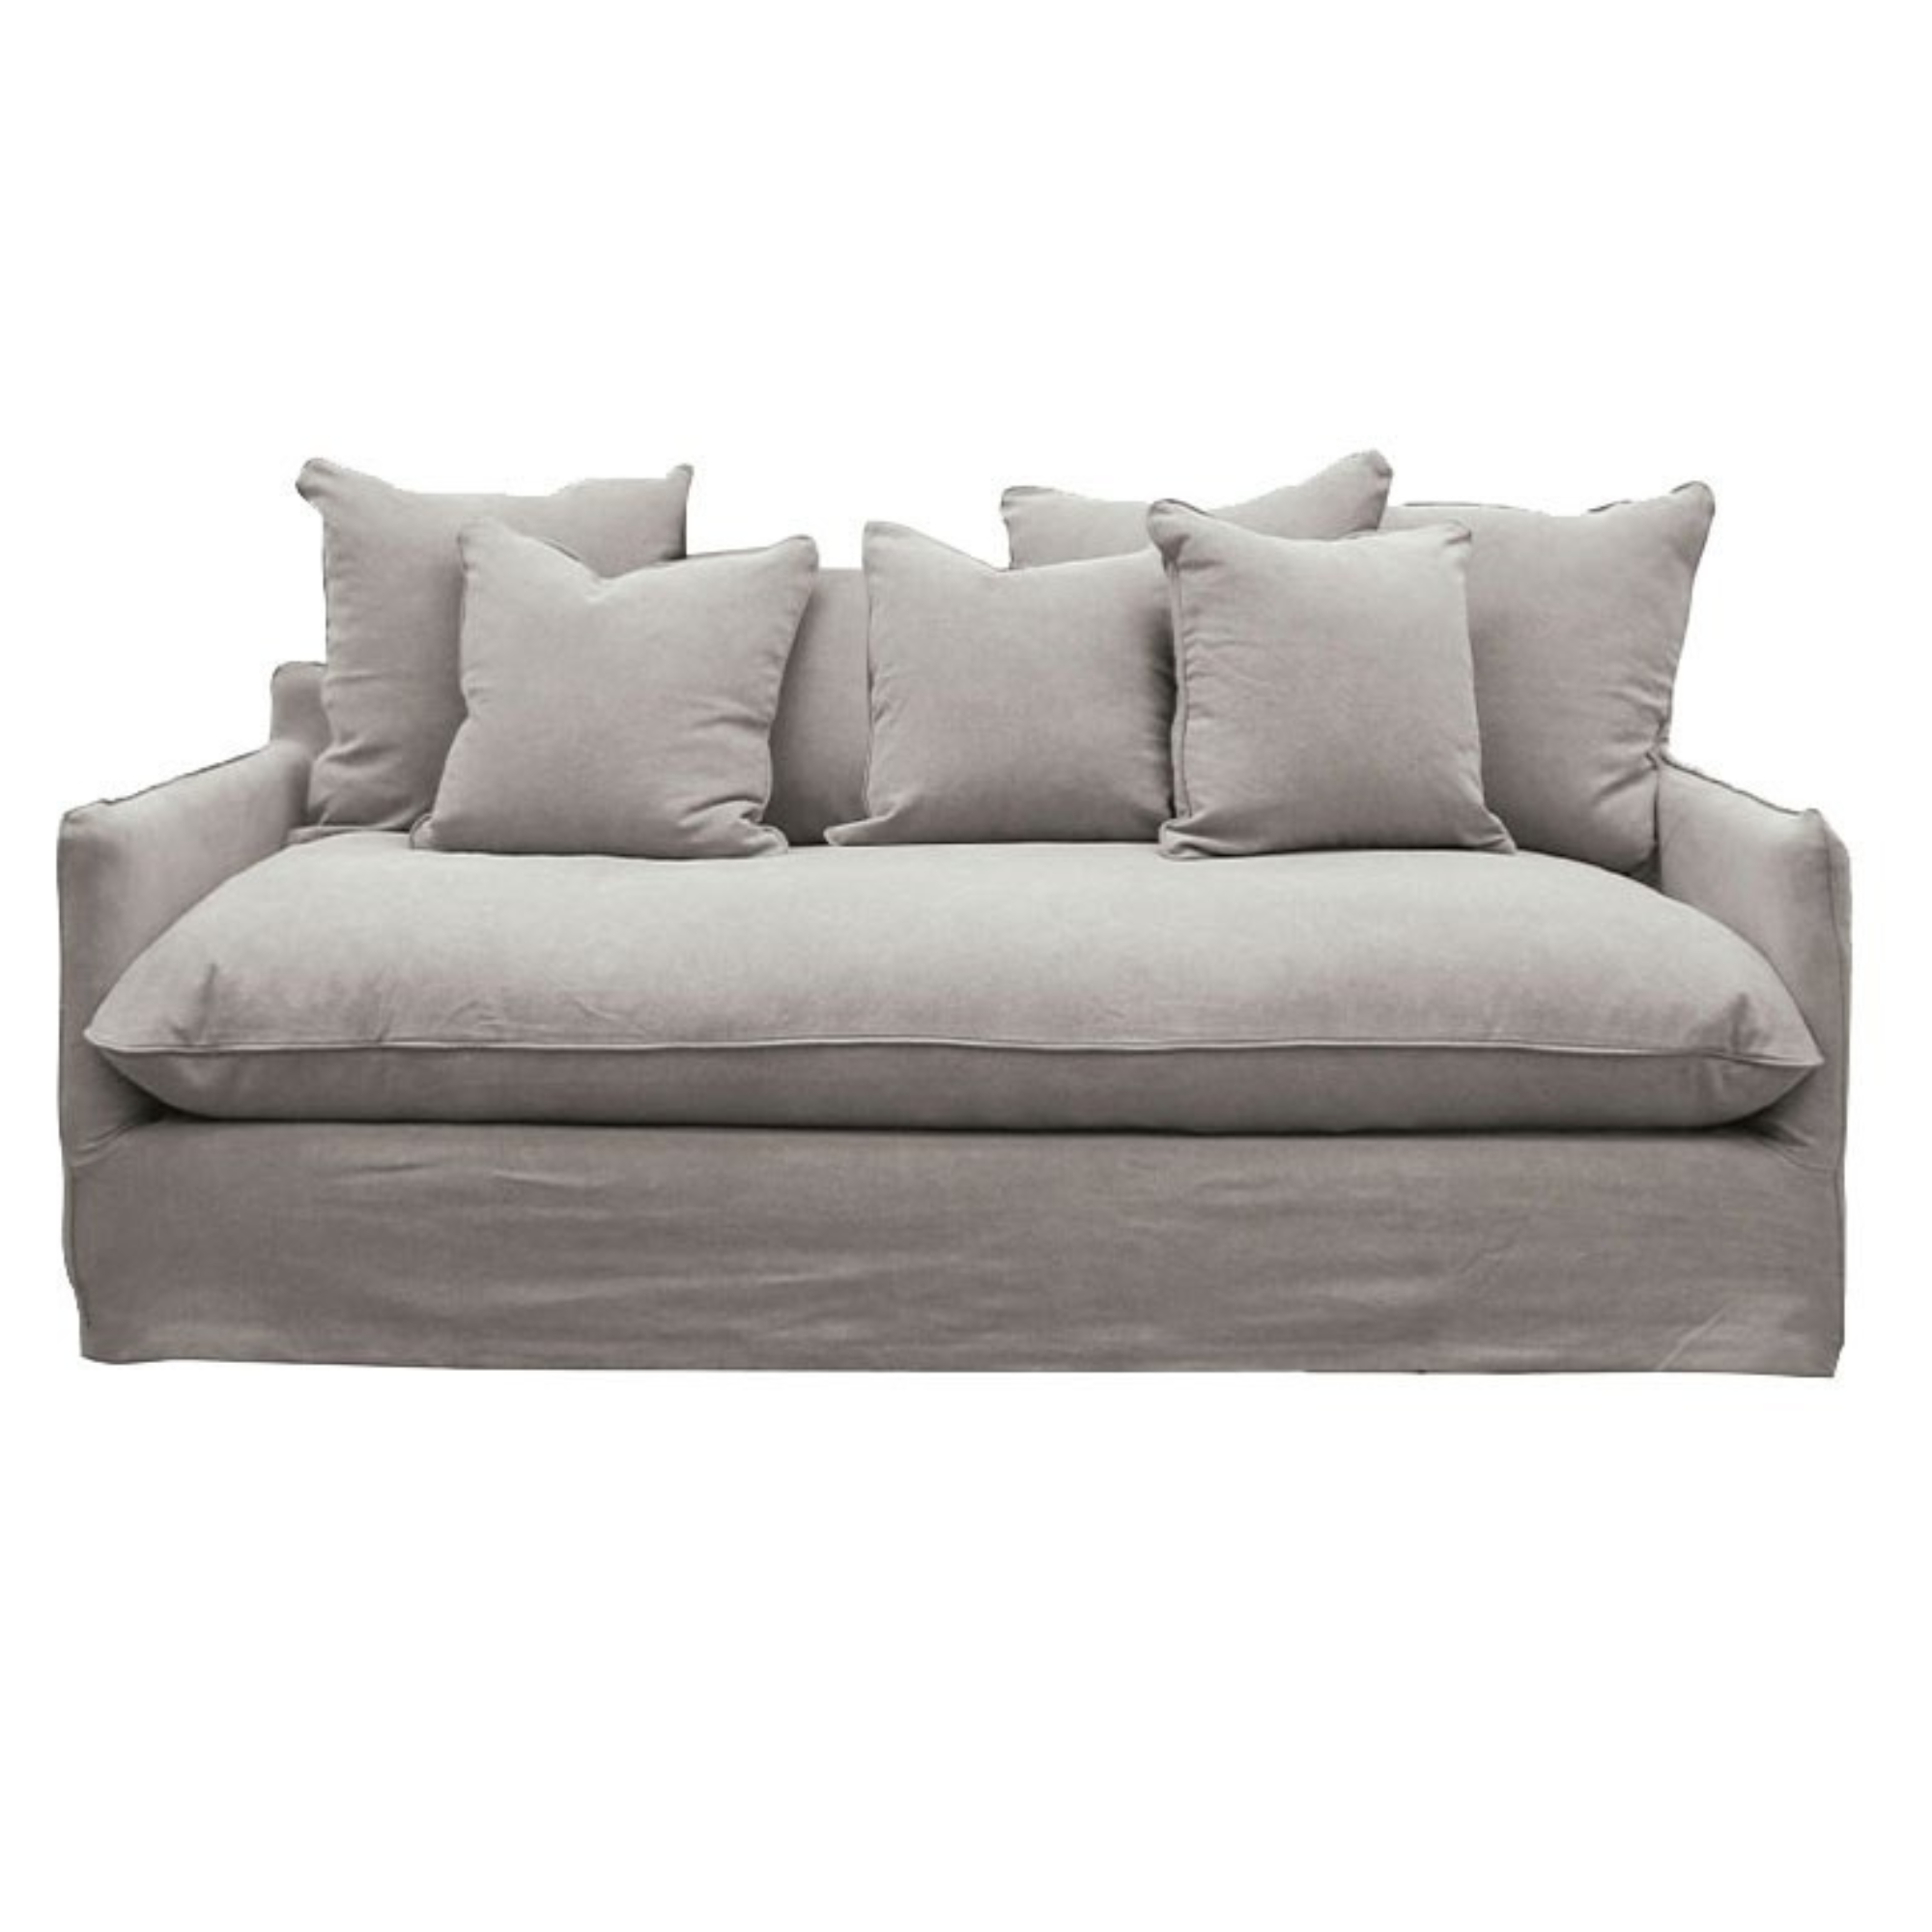 LOTUS SLIPCOVER 3 SEATER OR 2 SEATER SOFA | FEATHER